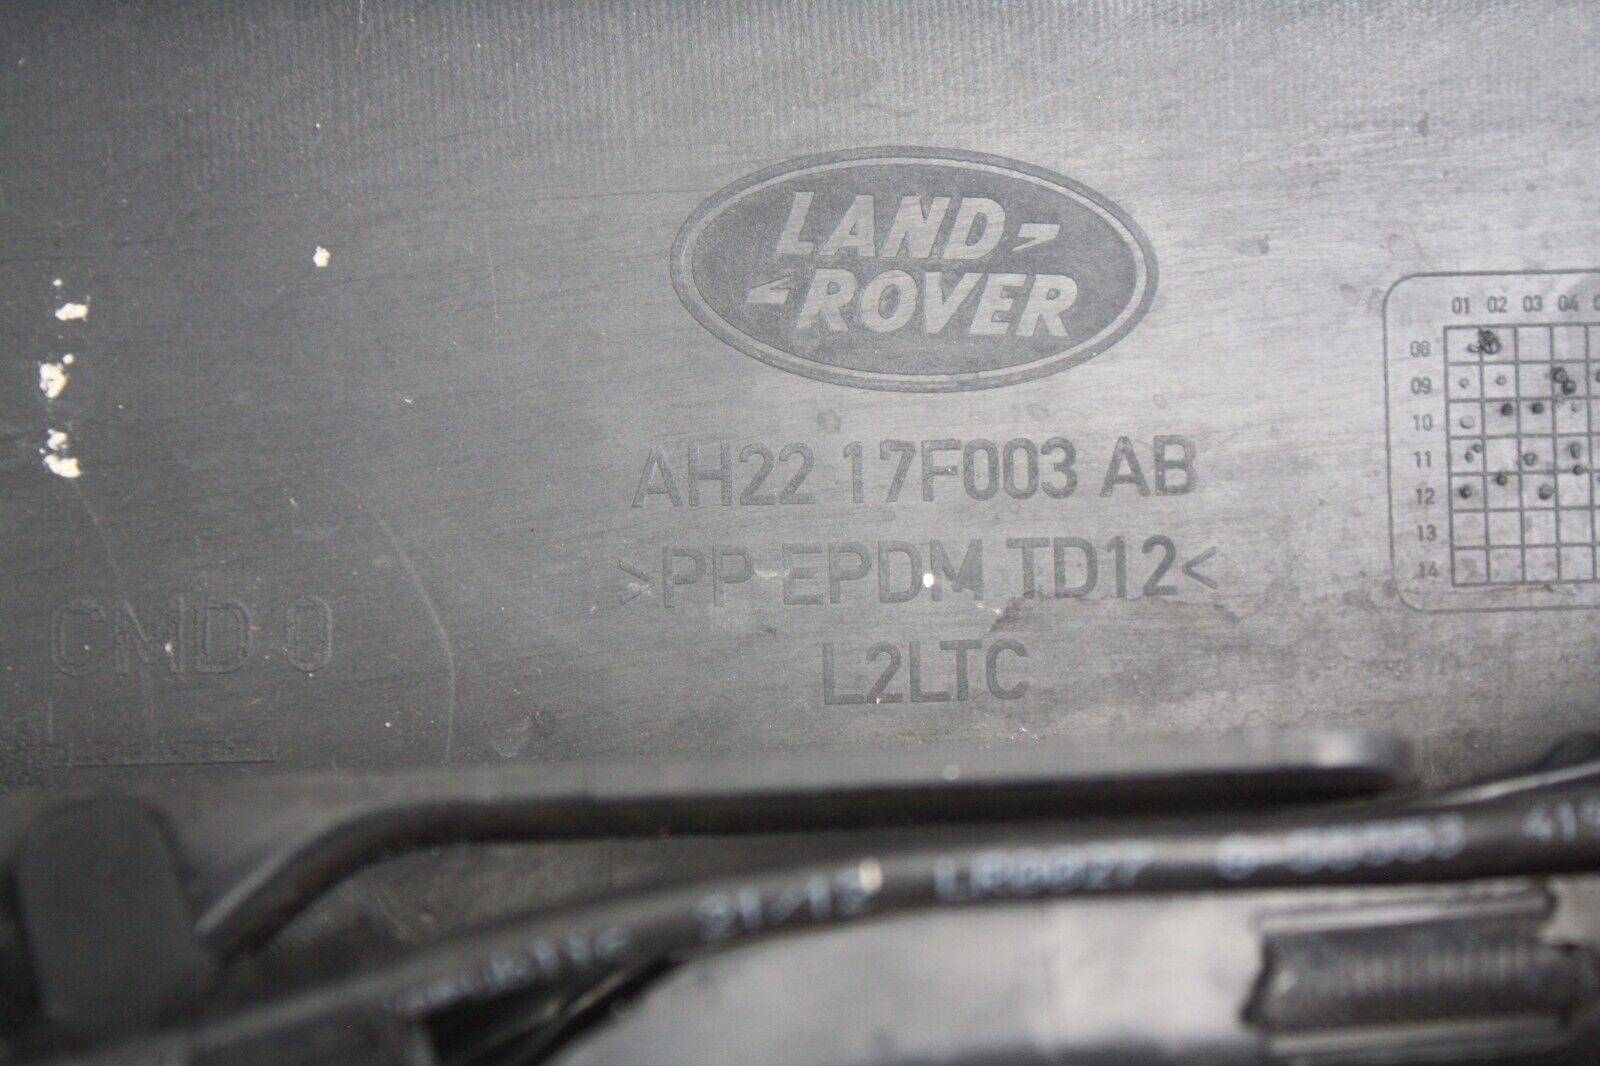 Land-Rover-Discovery-Front-Bumper-WLoom-Wire-2009-2013-AH22-17F003-AB-Genuine-175970300614-20